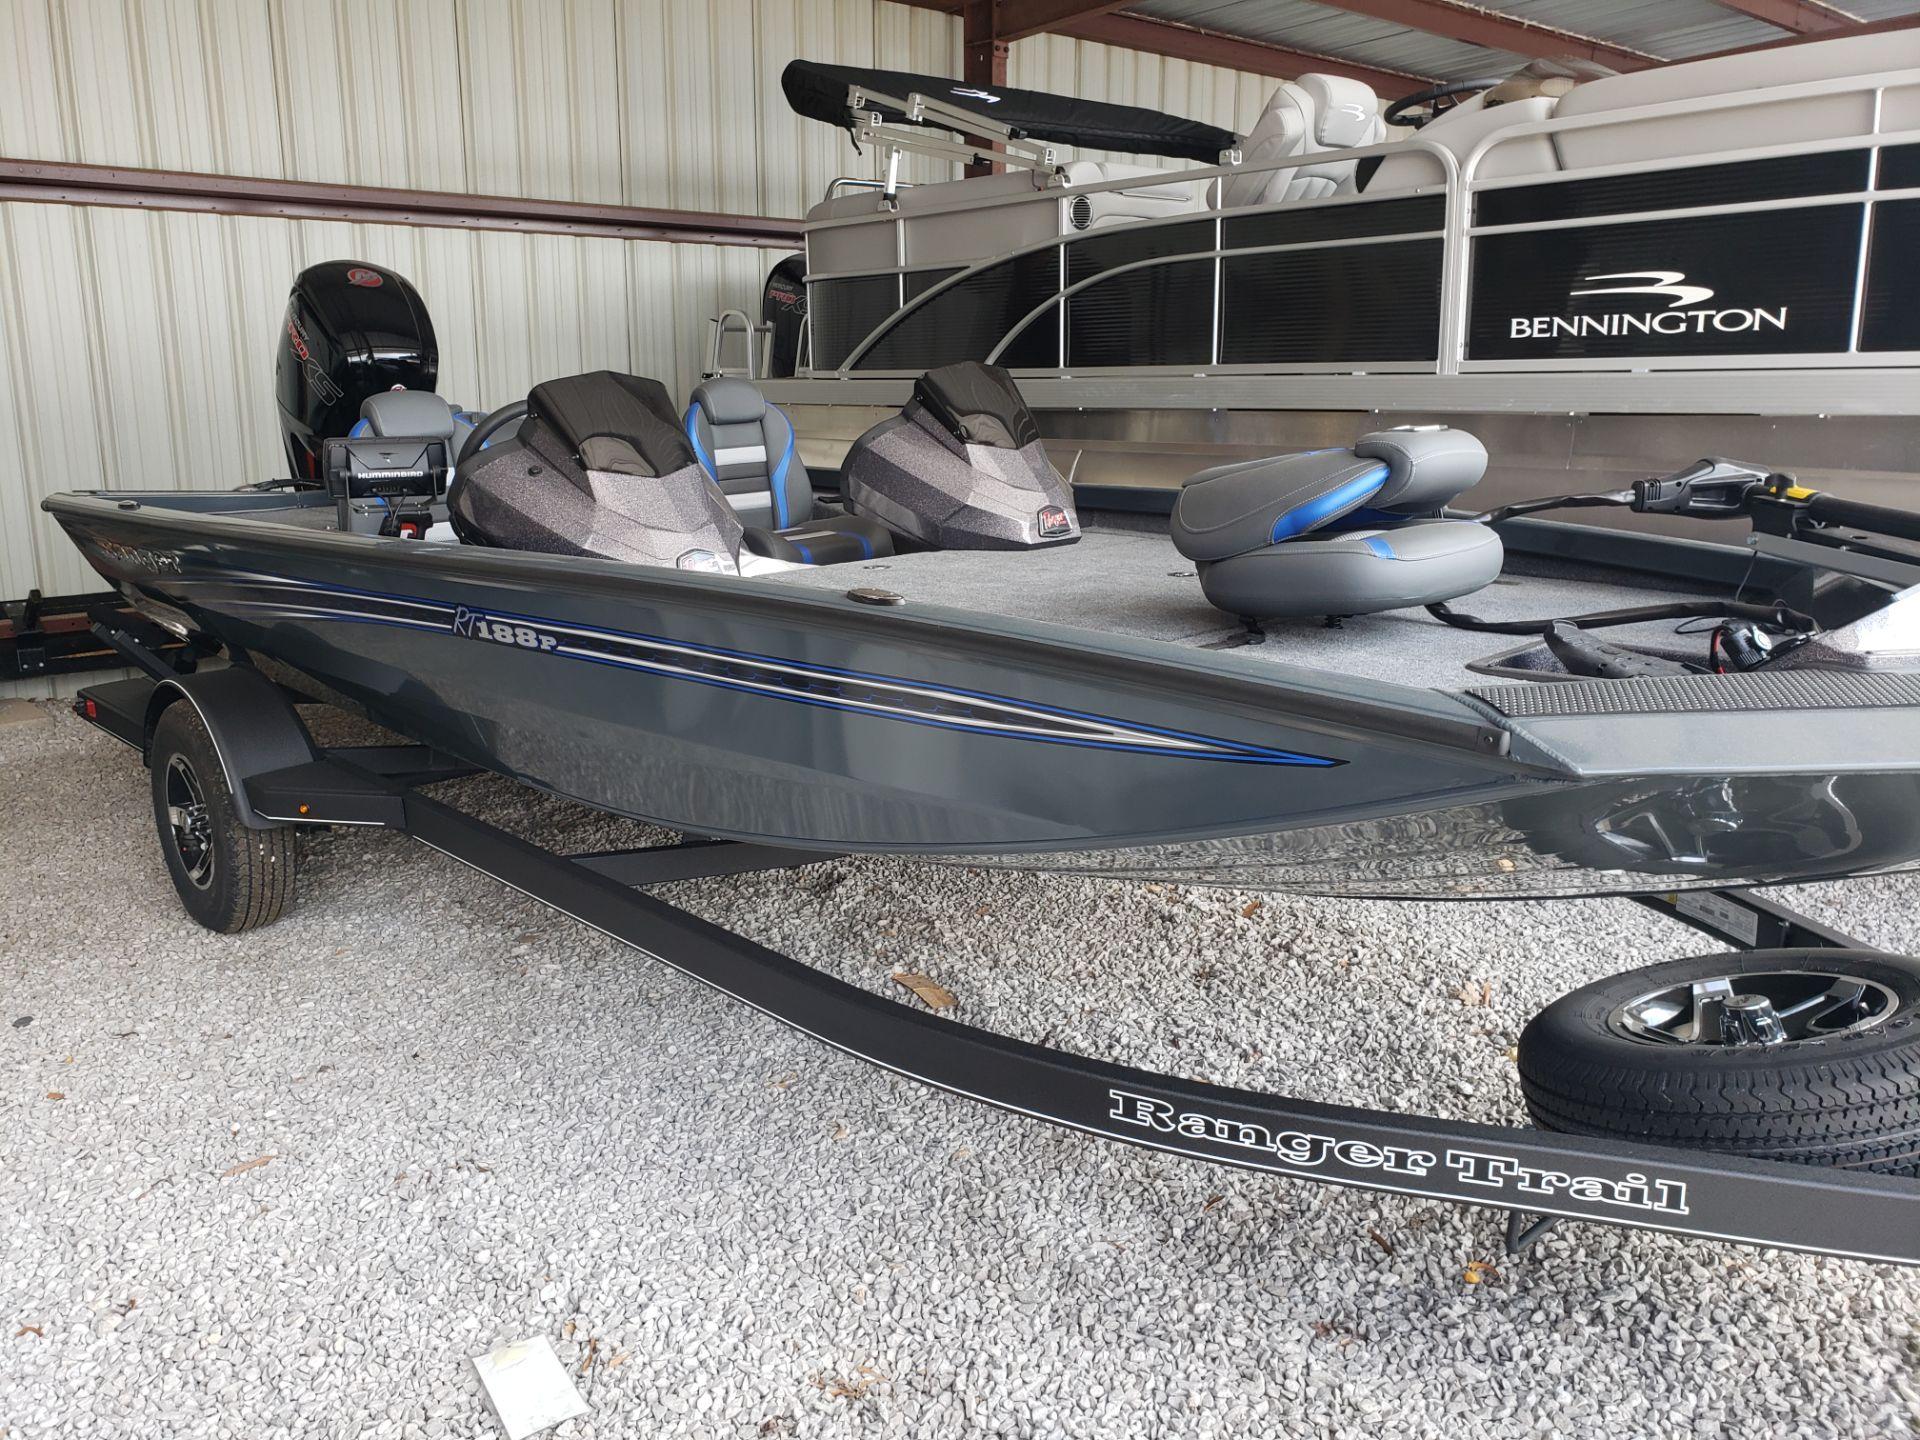 Ranger Rt188p Boats For Sale, 51% OFF